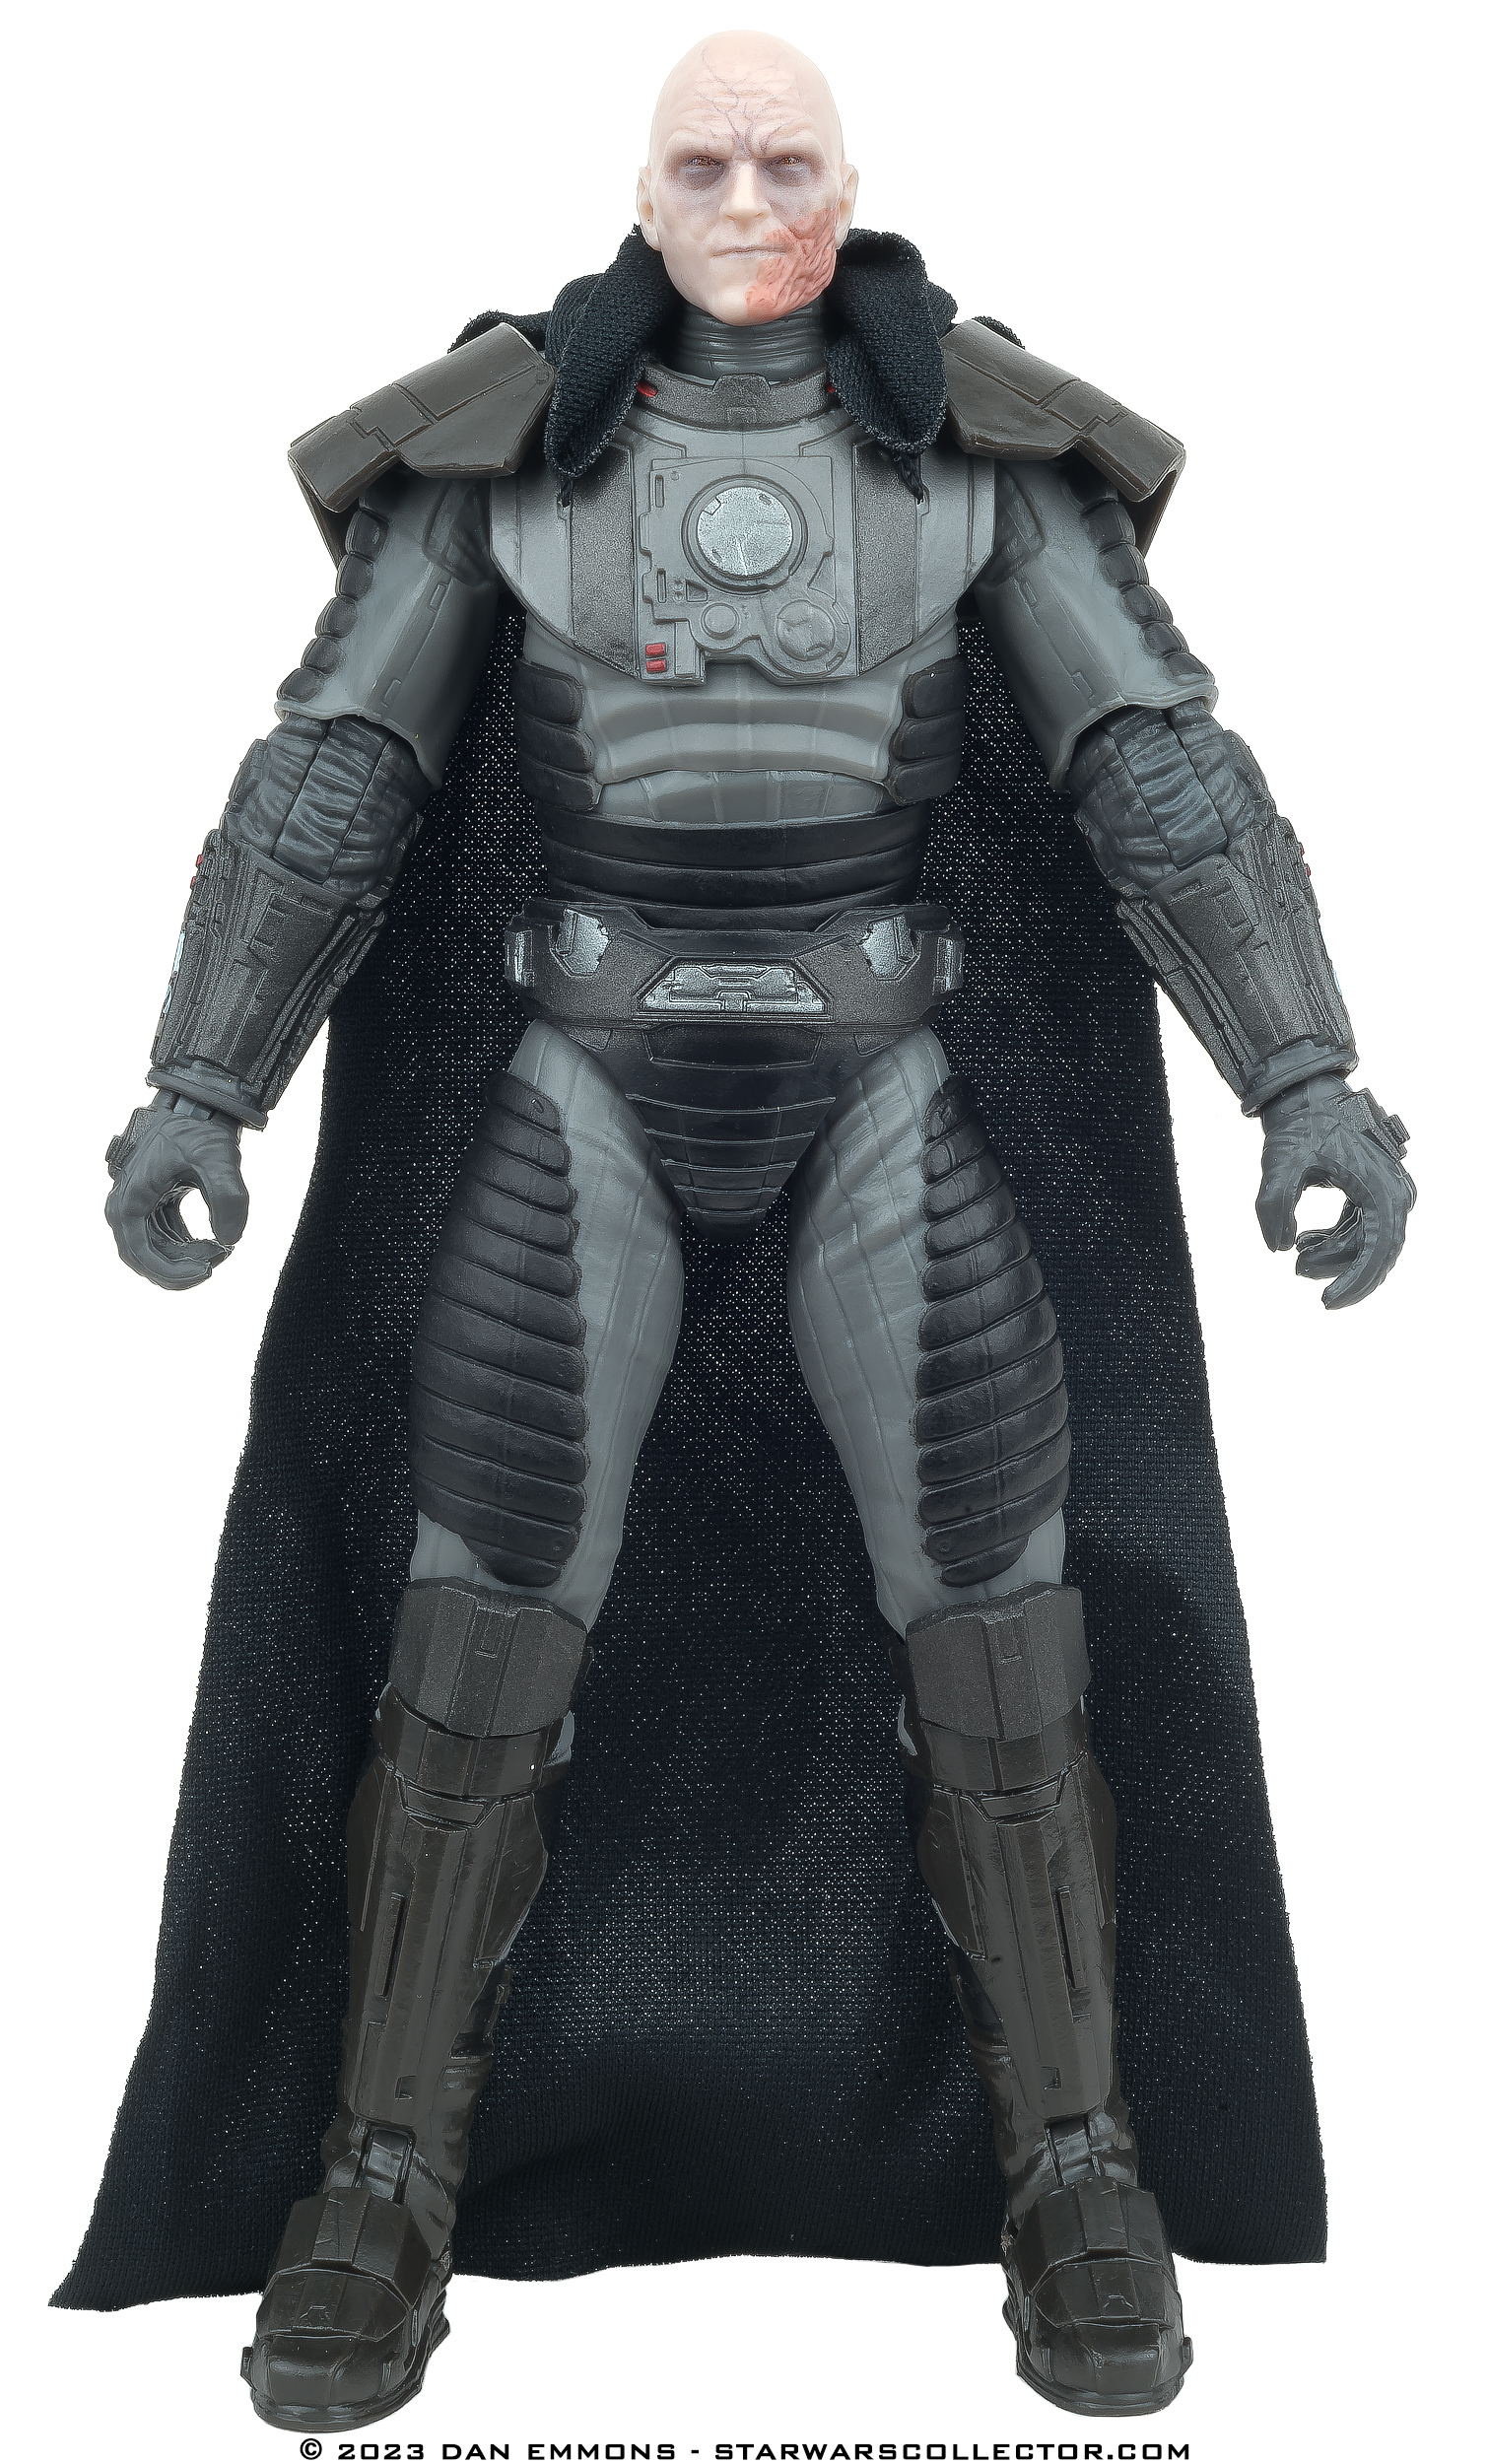 The Black Series 6-Inch Colorways Fan Channel Exclusive Gaming Greats Deluxe 24: Darth Malgus